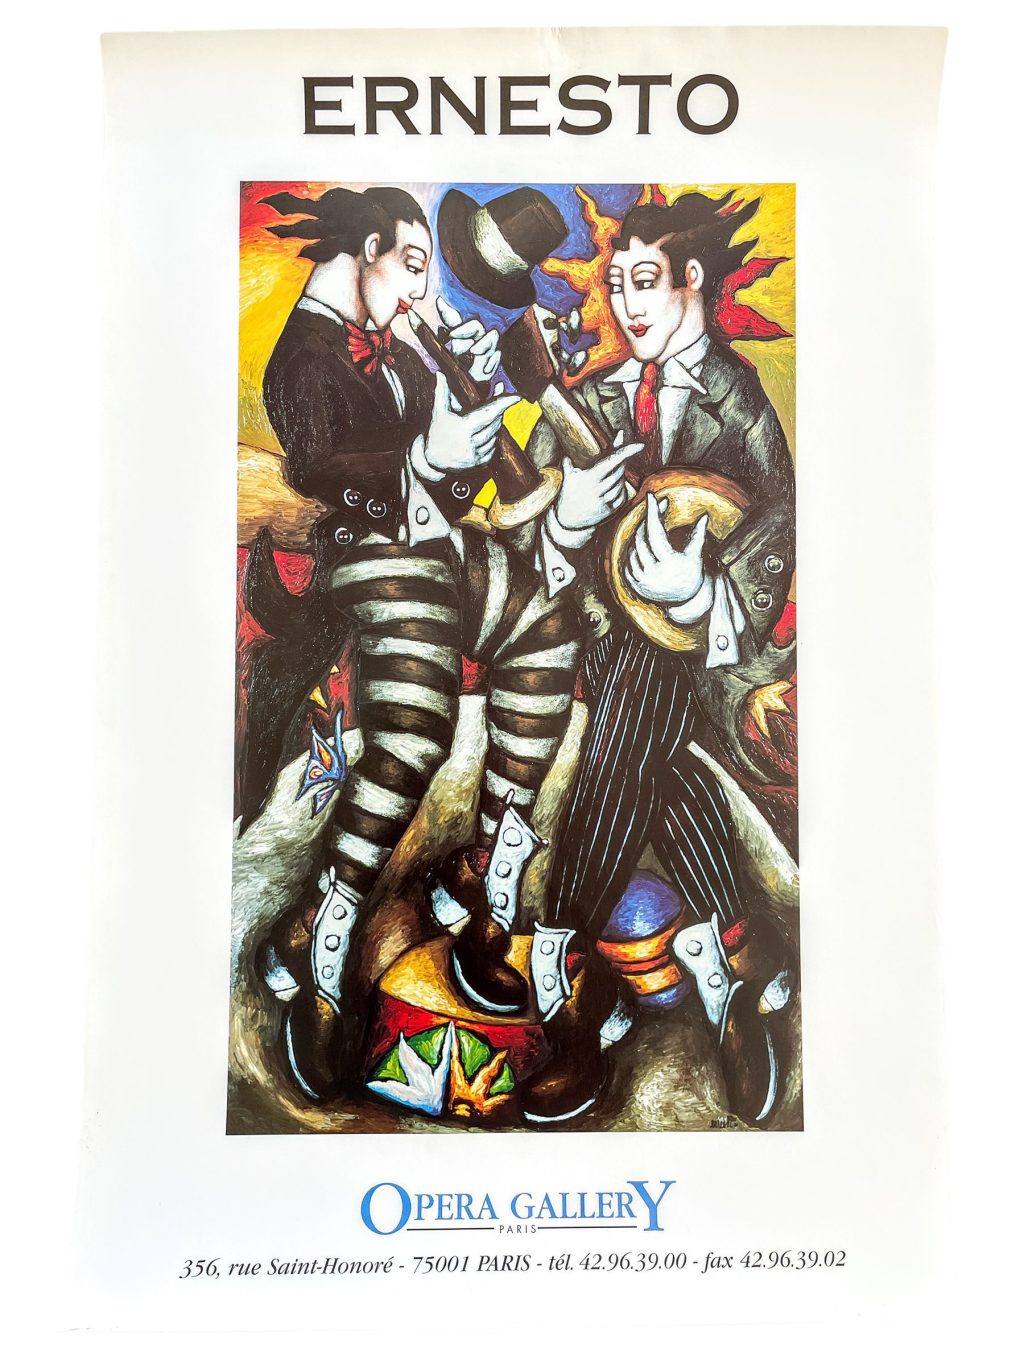 Vintage French Ernesto Galerie Opera Paris Gallery Original Exhibition Poster Wall Decor Painting Display Artwork c1990’s / EVE